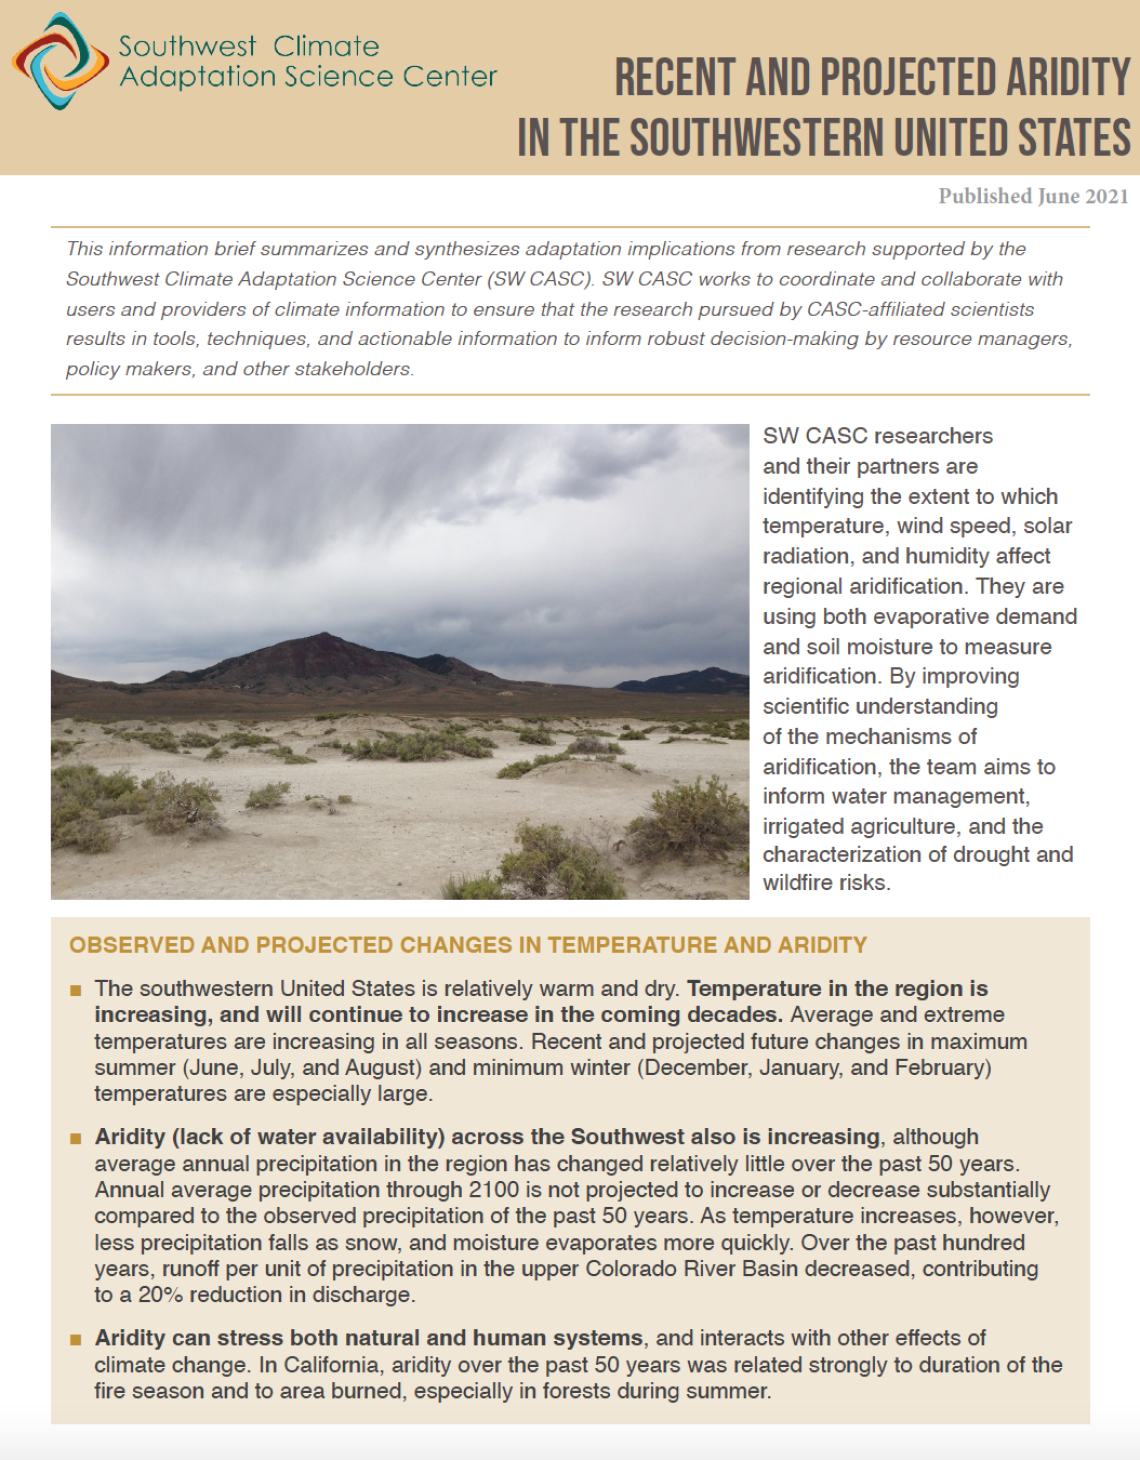 Flyer for Recent and Projected Aridity in the Southwestern United States.